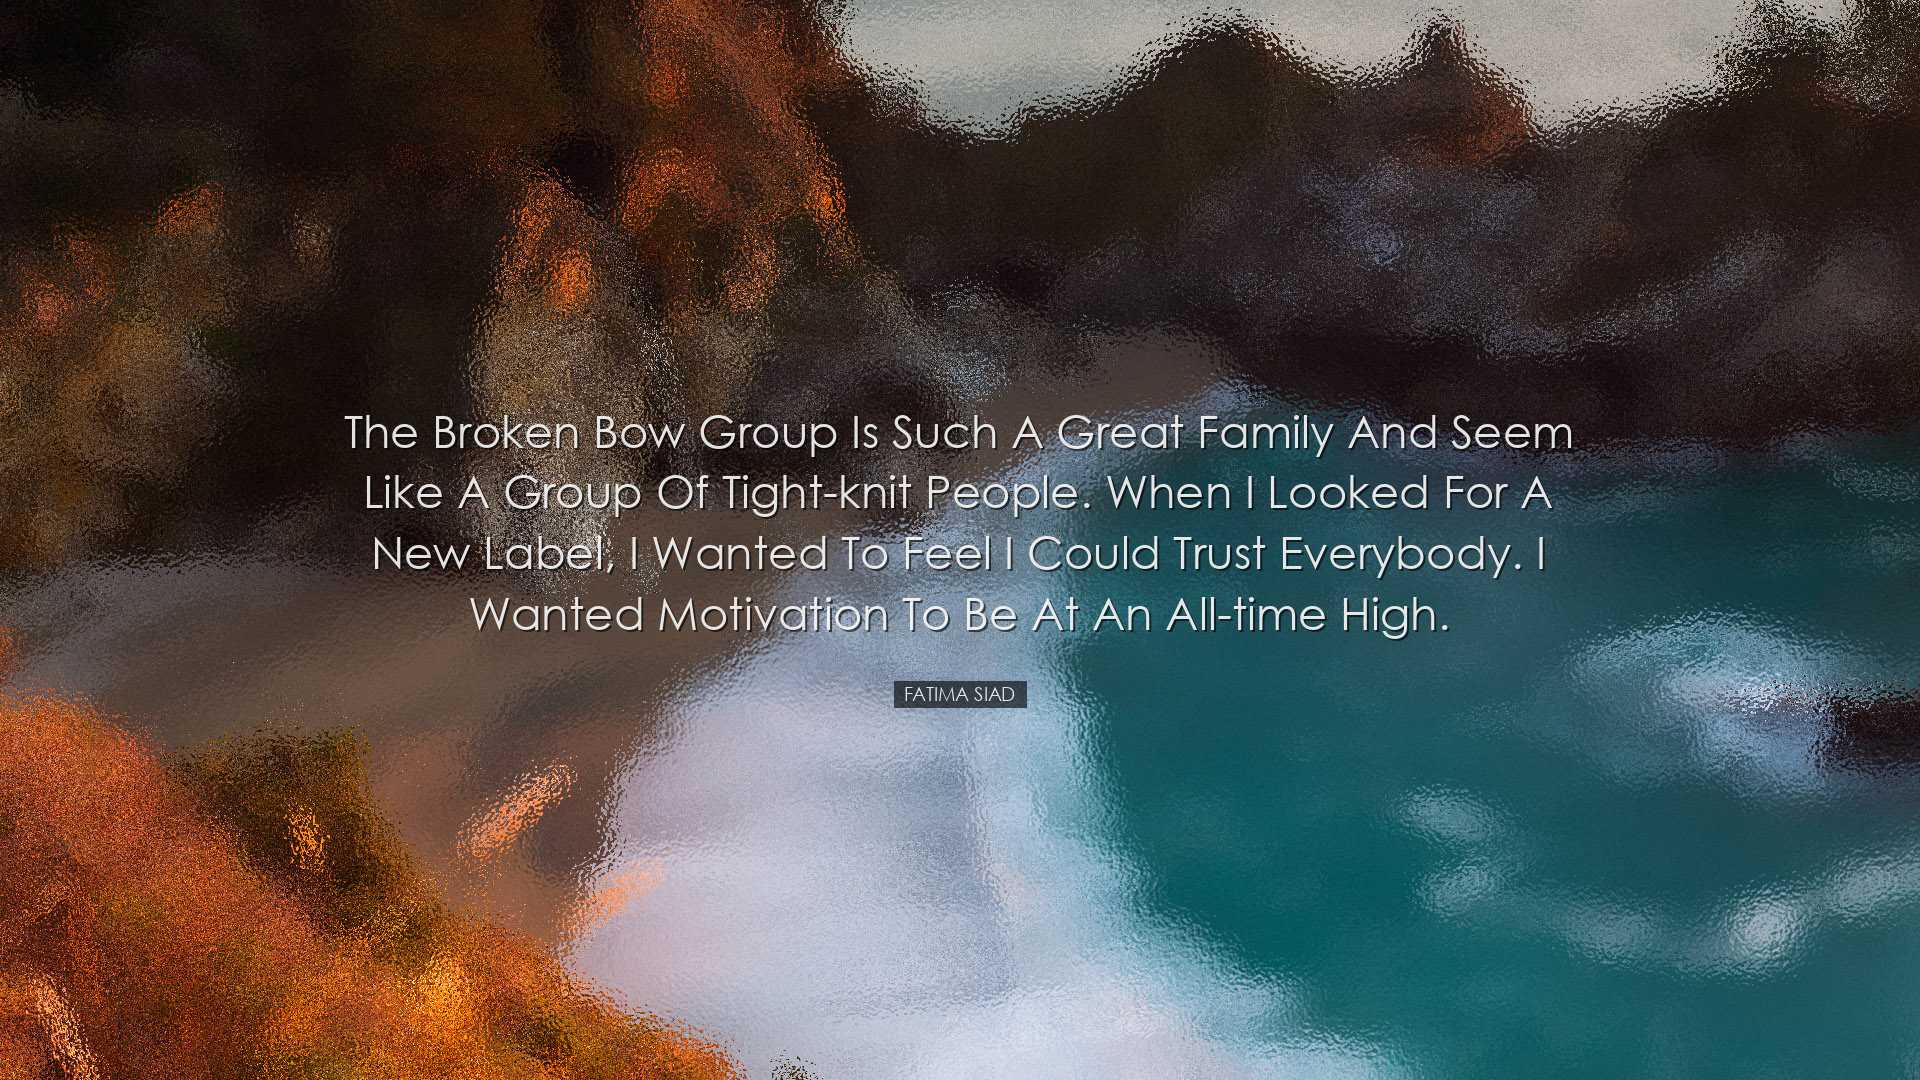 The Broken Bow group is such a great family and seem like a group